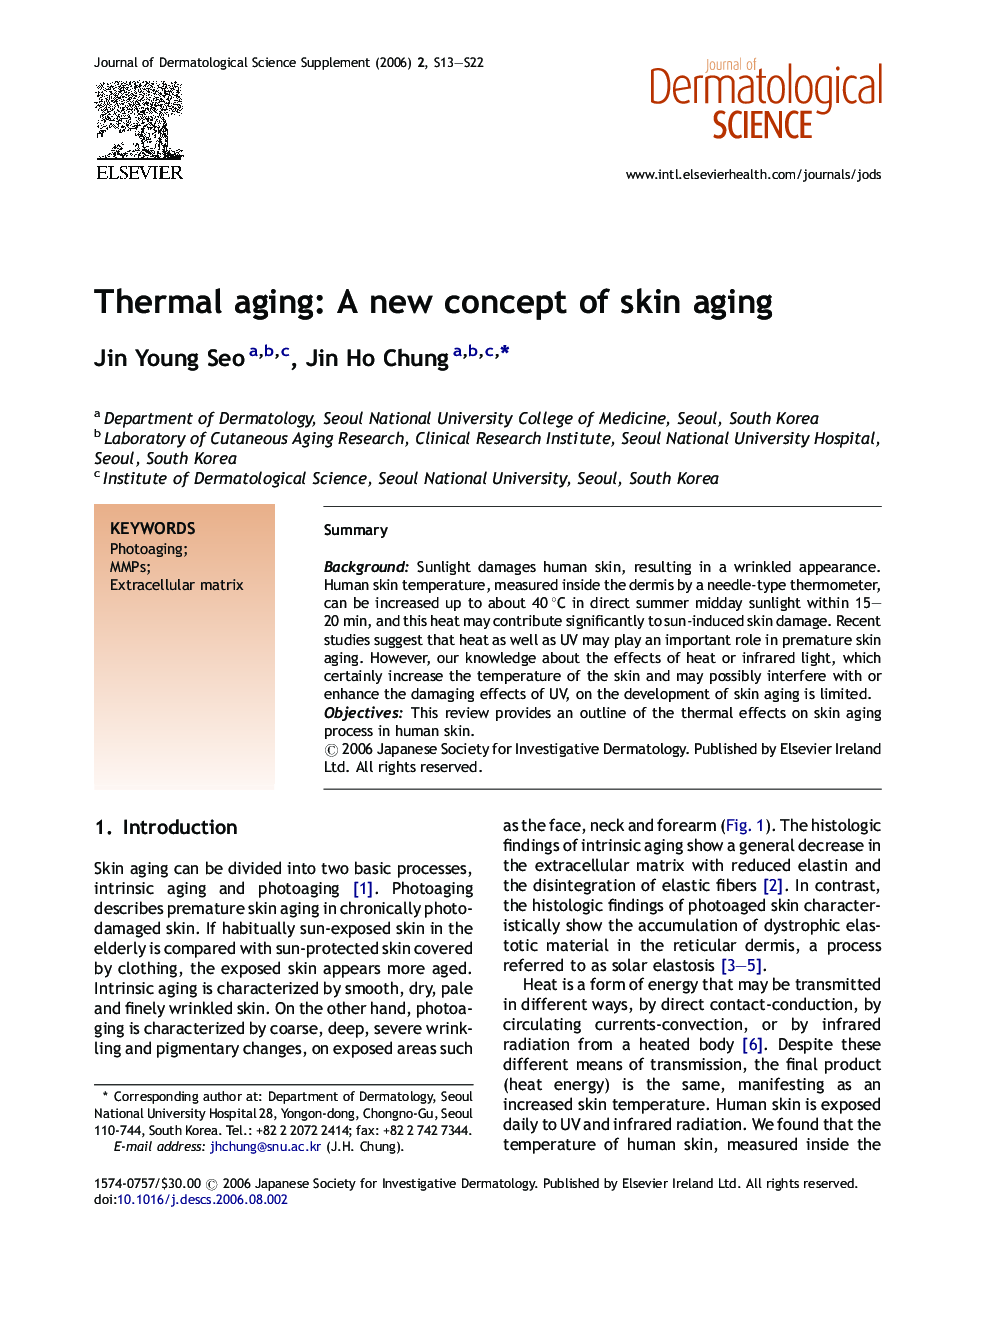 Thermal aging: A new concept of skin aging